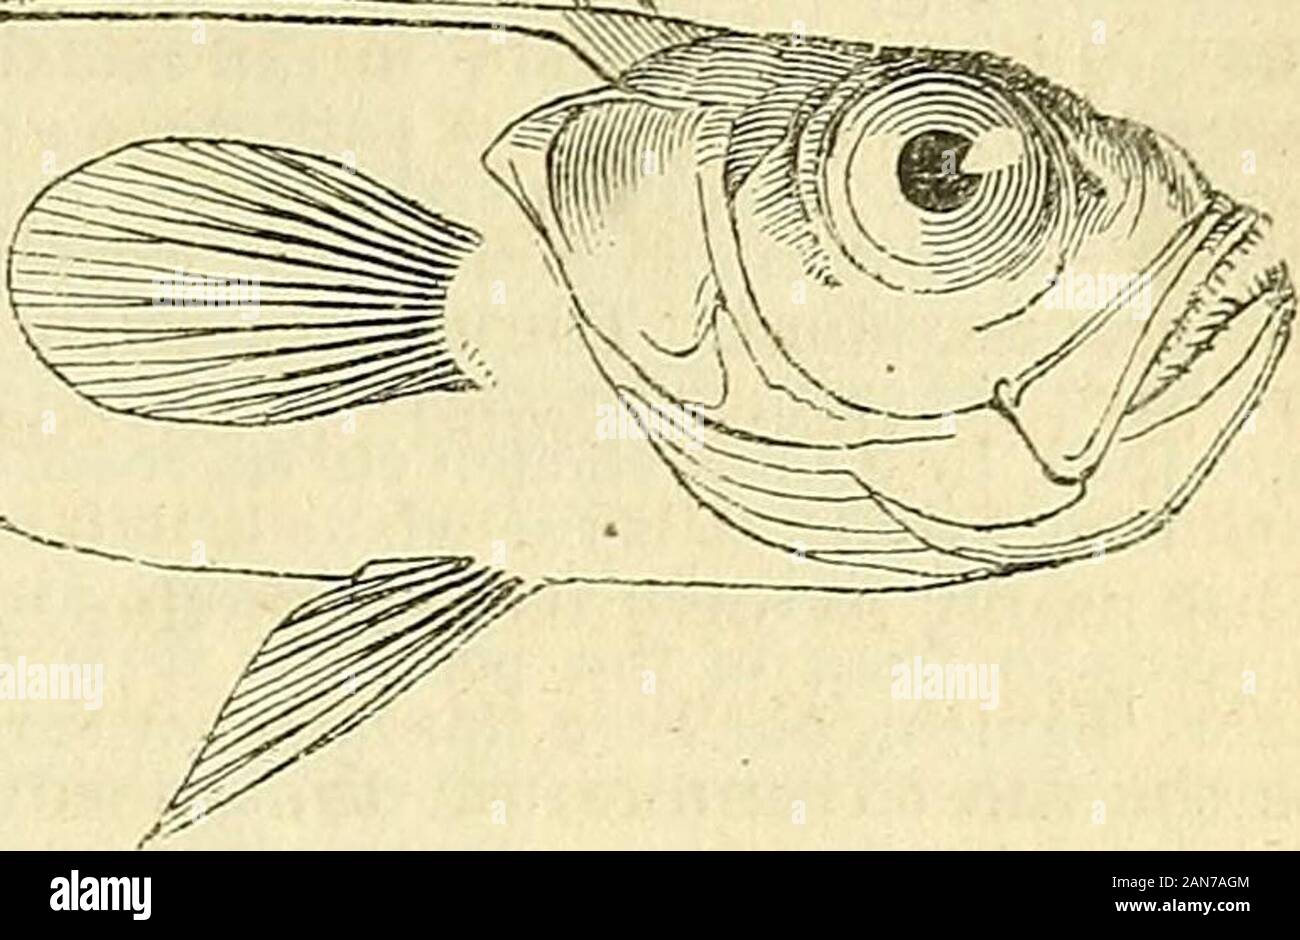 The natural history of fishes, amphibians, & reptiles, or monocardian animals . tentive examination, will be found to vary in a most remarkable manner.These characters, so difficult to determine in preserved specimens, eitherwet or dry, may in some measure account for the universal belief of therebeing but one species-. APPENDIX. 399 The Cepola rubescens of LinnEeus was probably a northern fish, and weaccordingly retain that name to the one figured and descri- . j ?8 bed by Montague.* It is atonce known from the follow-ing by the specific charac-ters above mentioned. Wemay observe^ in addition Stock Photo